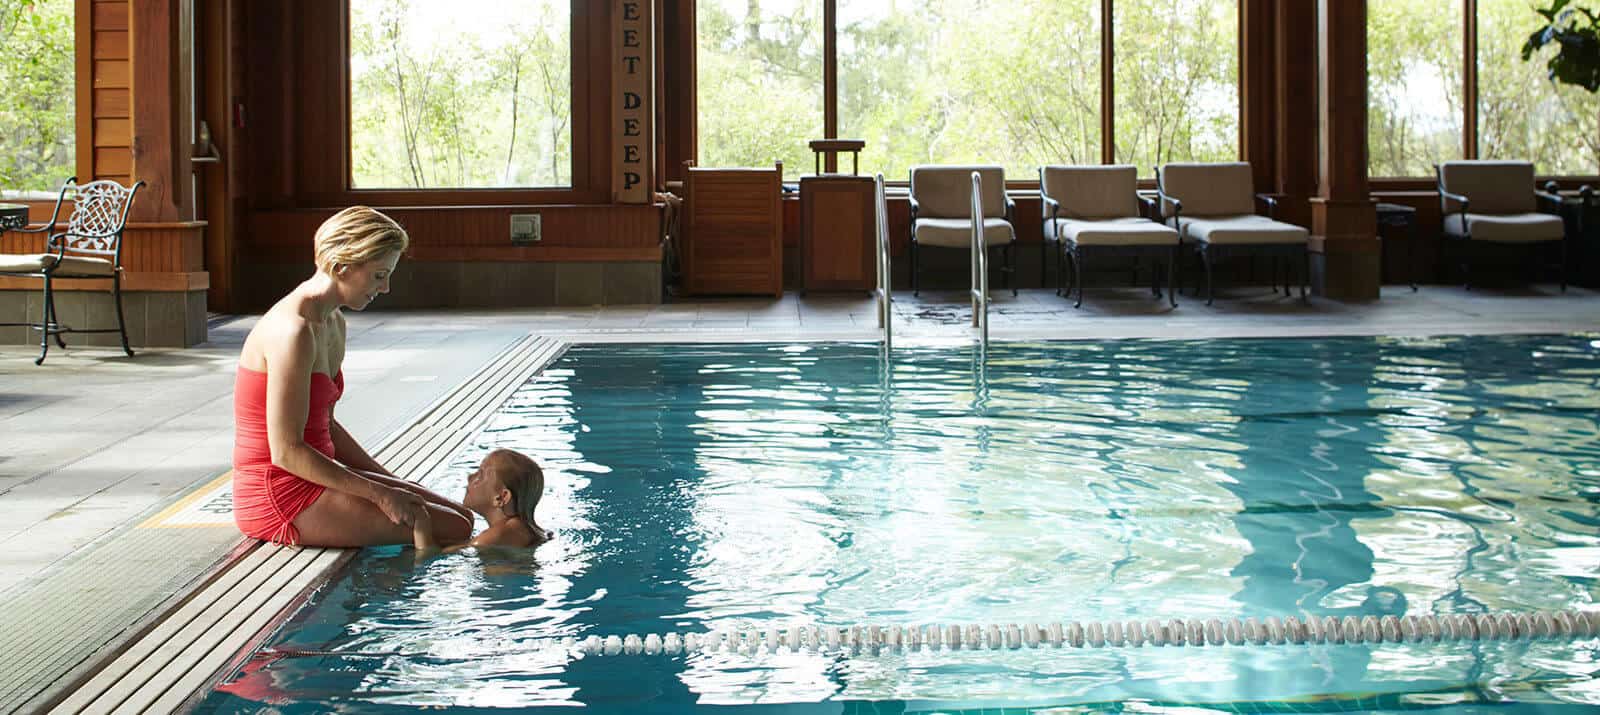 Pool and Spa at Mohonk Mountain House